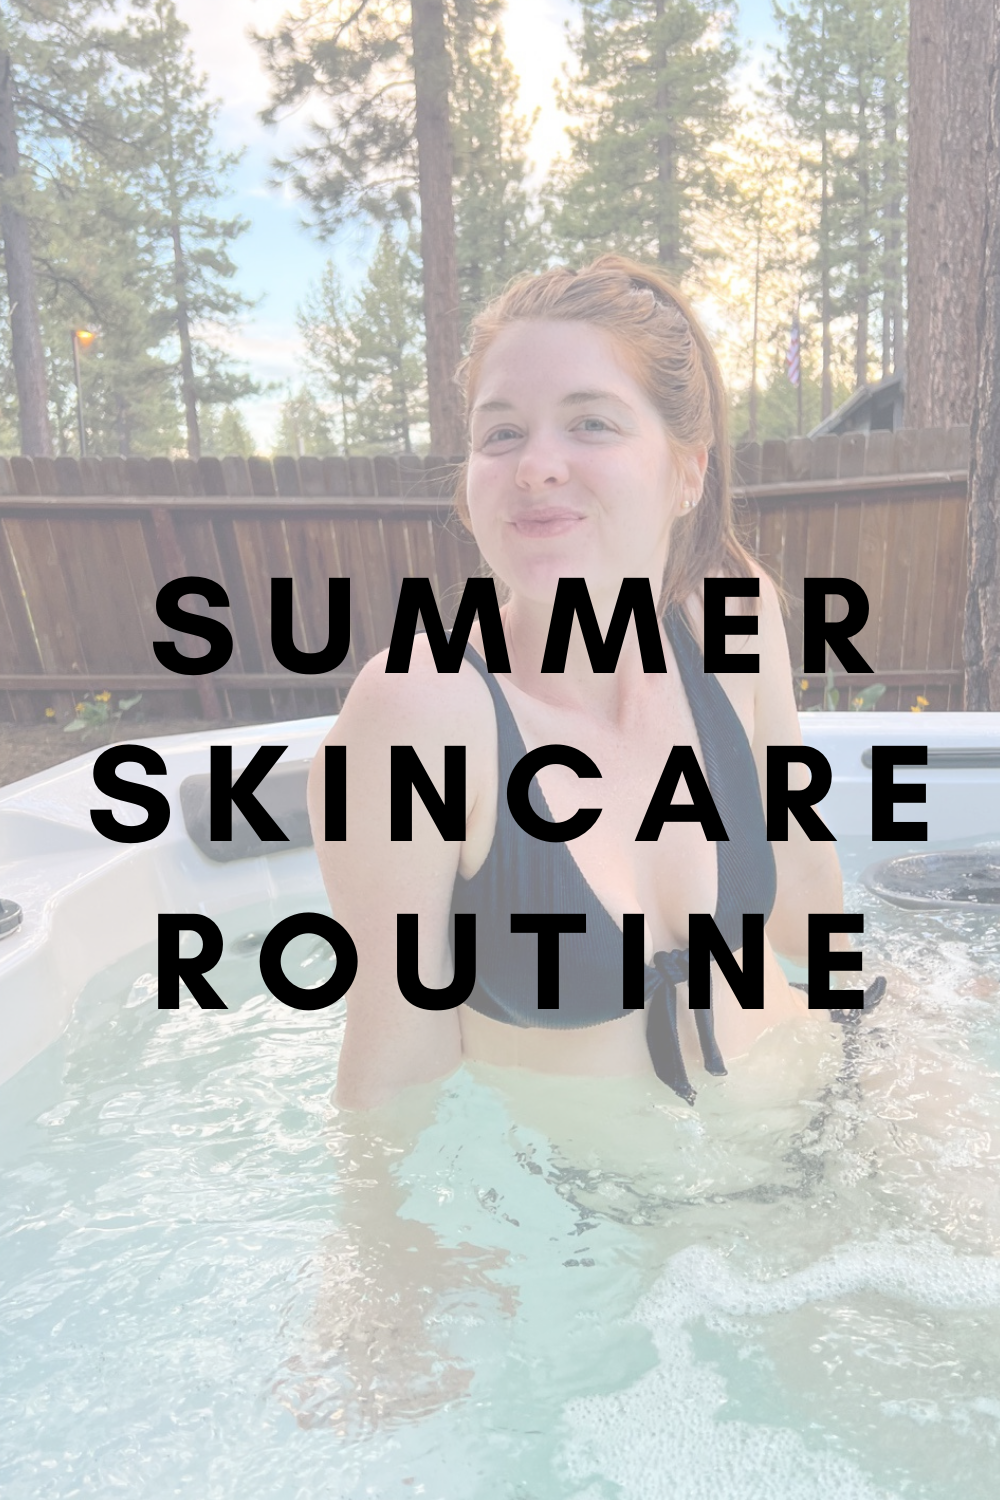 summer skincare routine, south lake tahoe, lments of style, rnr vacation rentals, la blogger